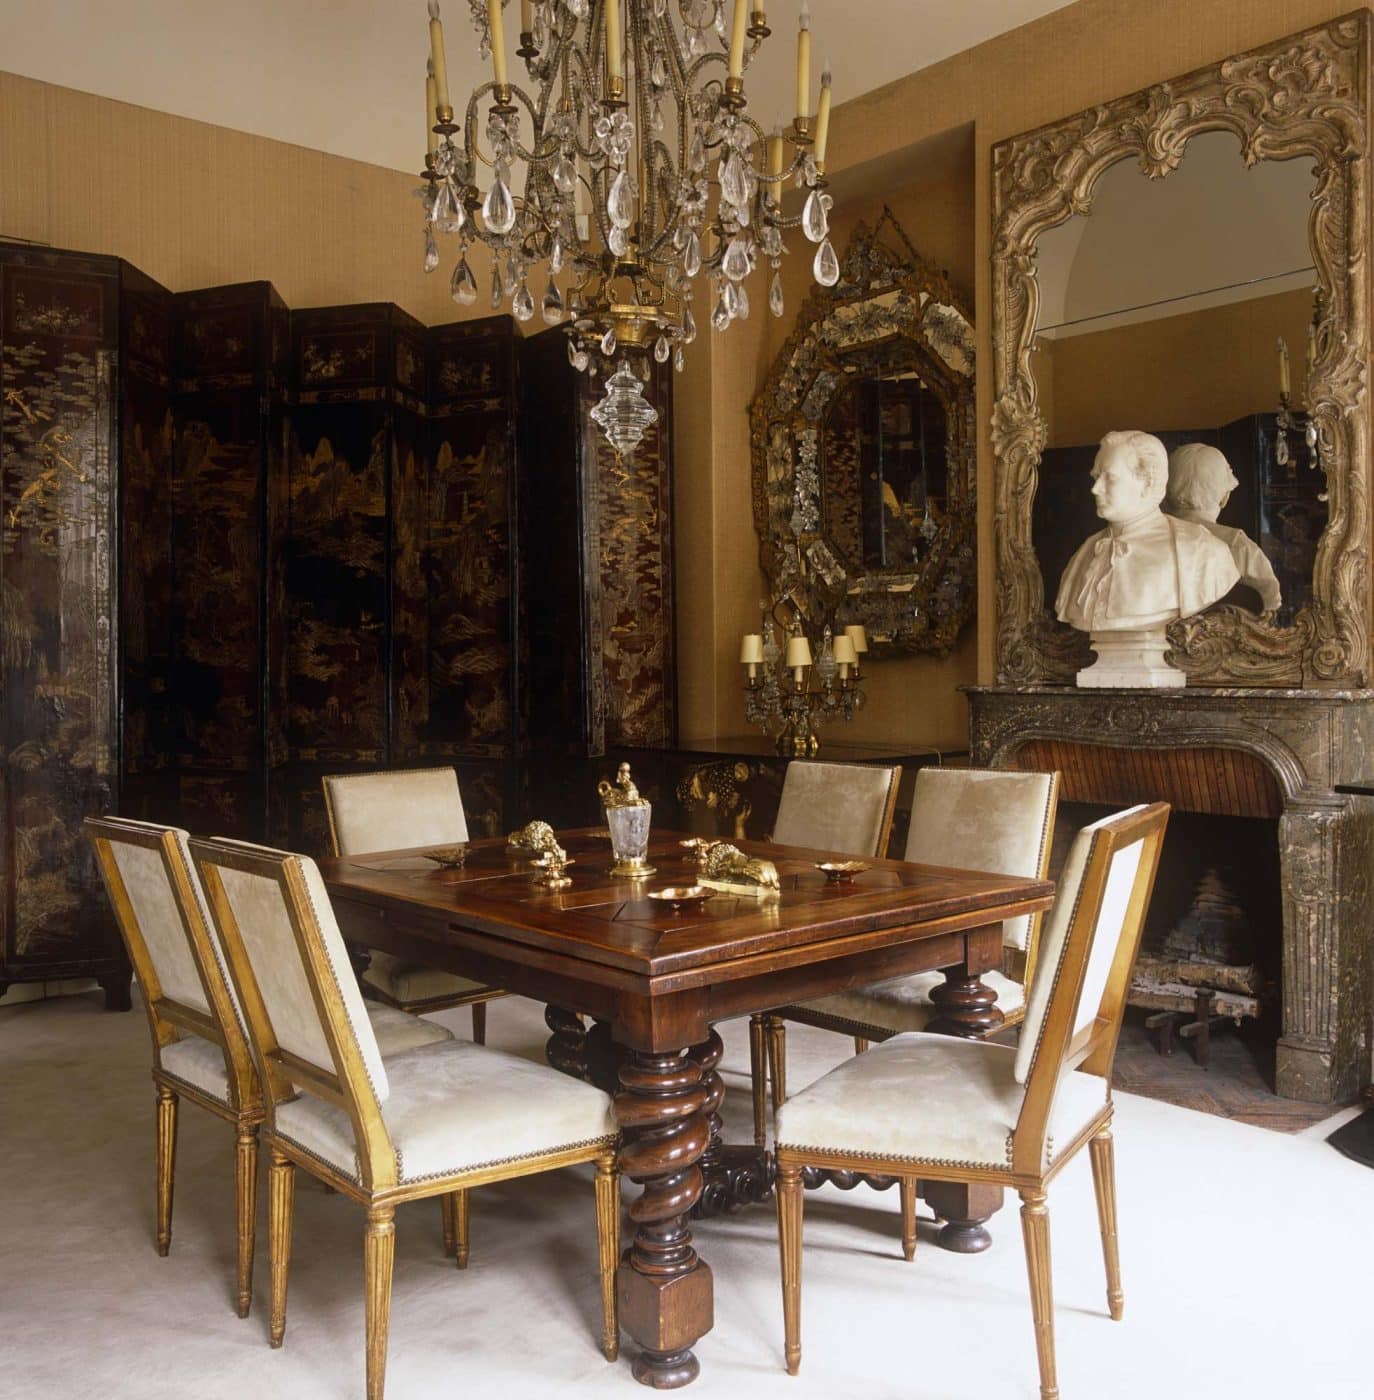 Dining room of Coco Chanel's Paris apartment